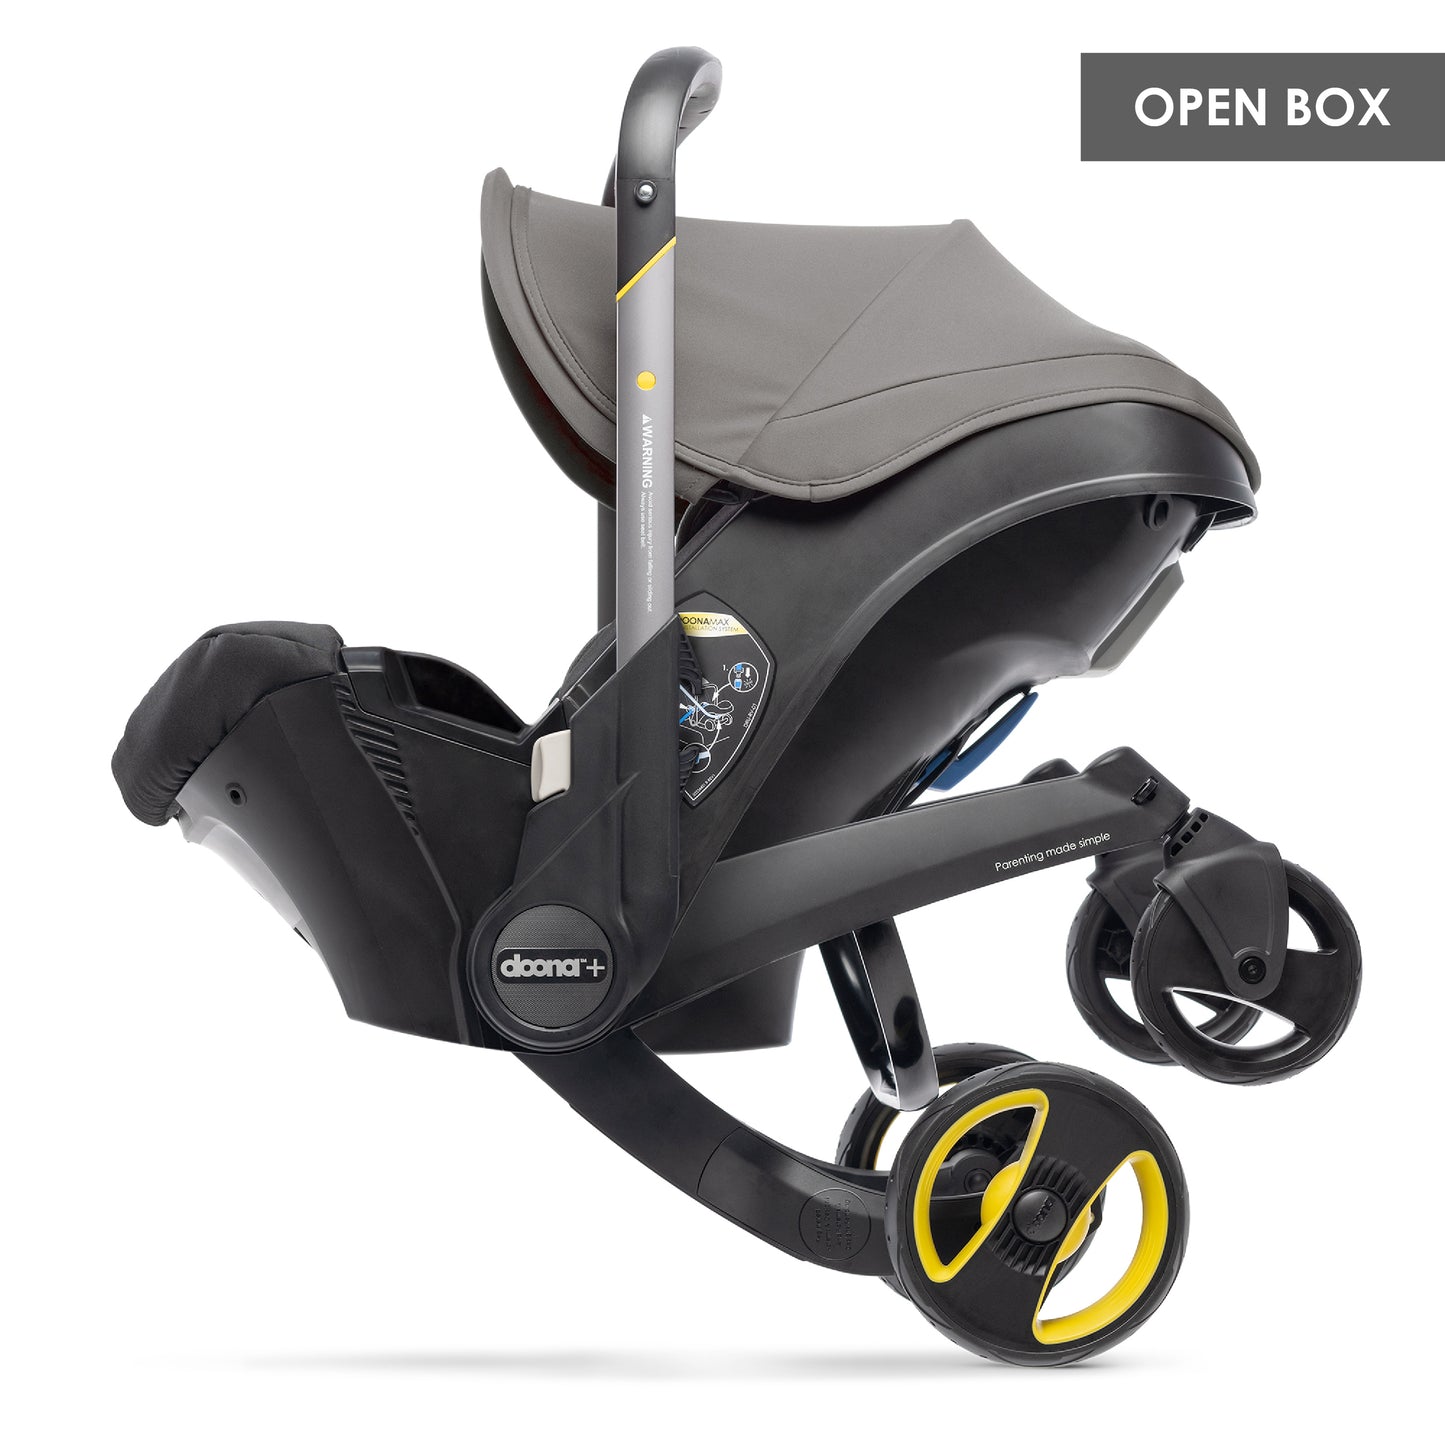 Open Box Doona Infant Car Seat and Stroller in Greyhound